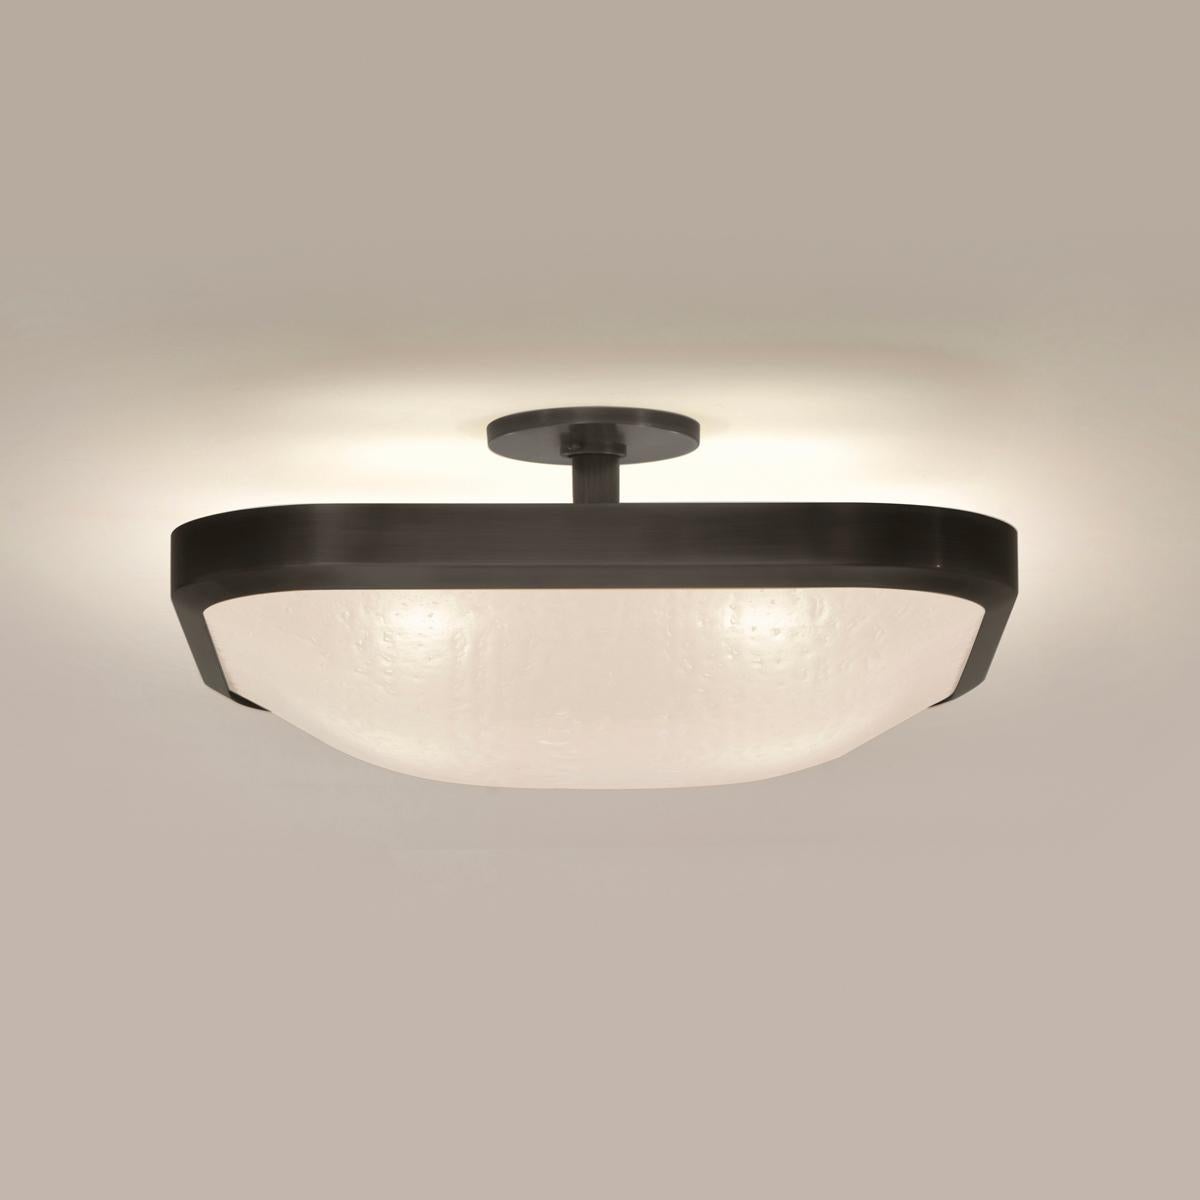 The Uno Square ceiling light exemplifies simple elegance via its clean profile designed around a single Murano glass shade.

Shown in the primary images in Brunito Nero (Black Bronze)-subsequent pictures show the fixture in other featured